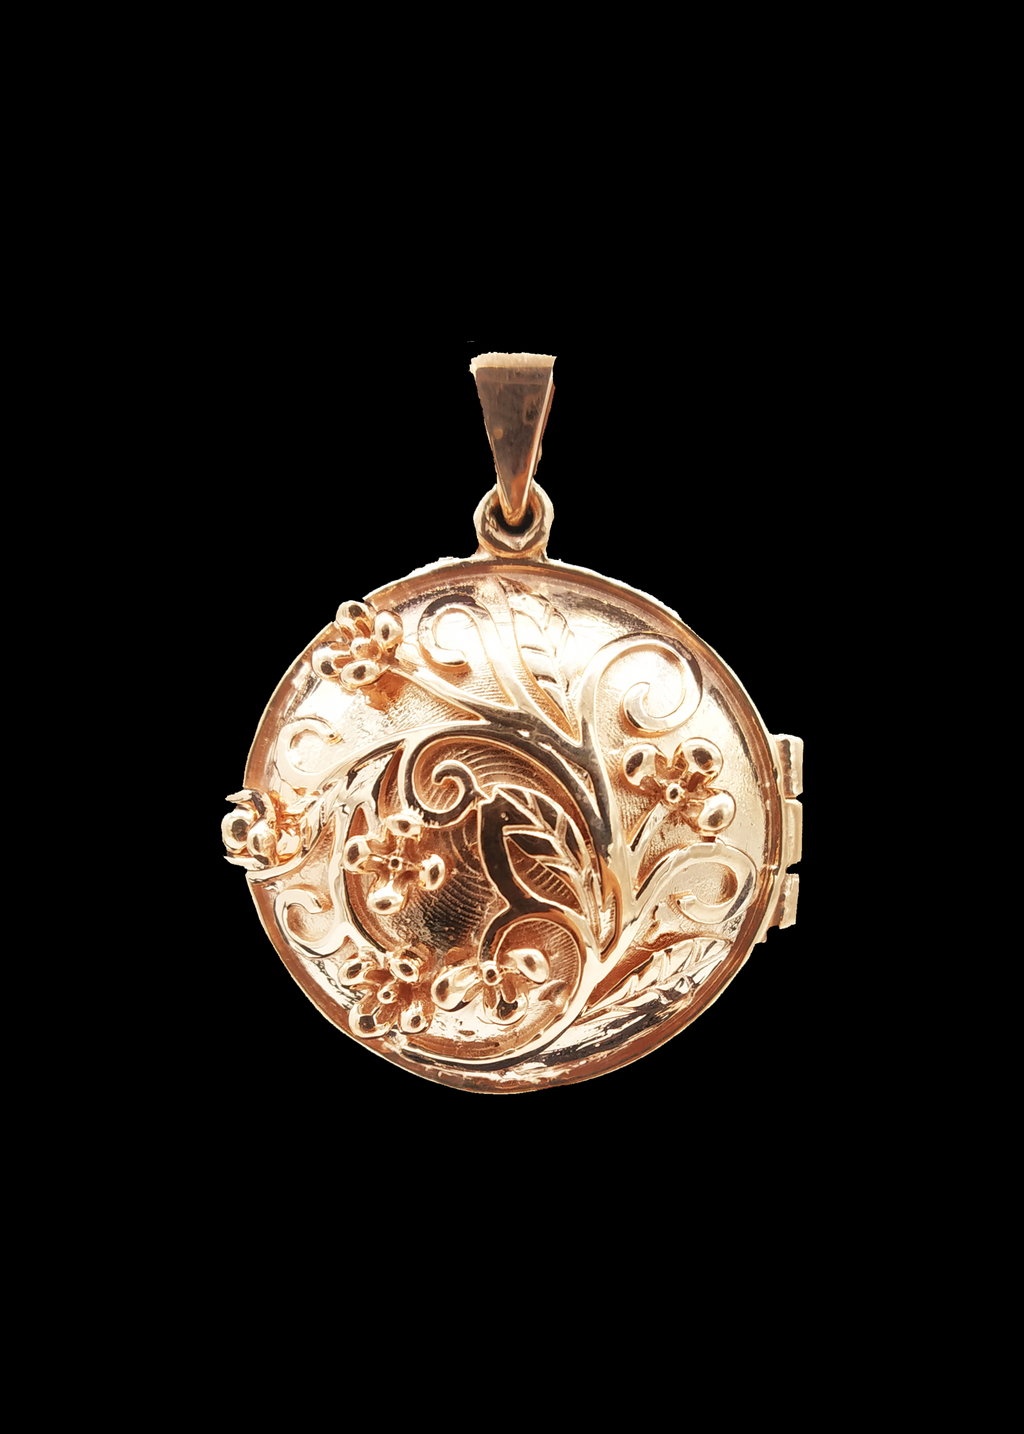 Zevaari USA's C-Shield Virus Protection Pendent in gold in Round Flower Shape In Sterling Silver